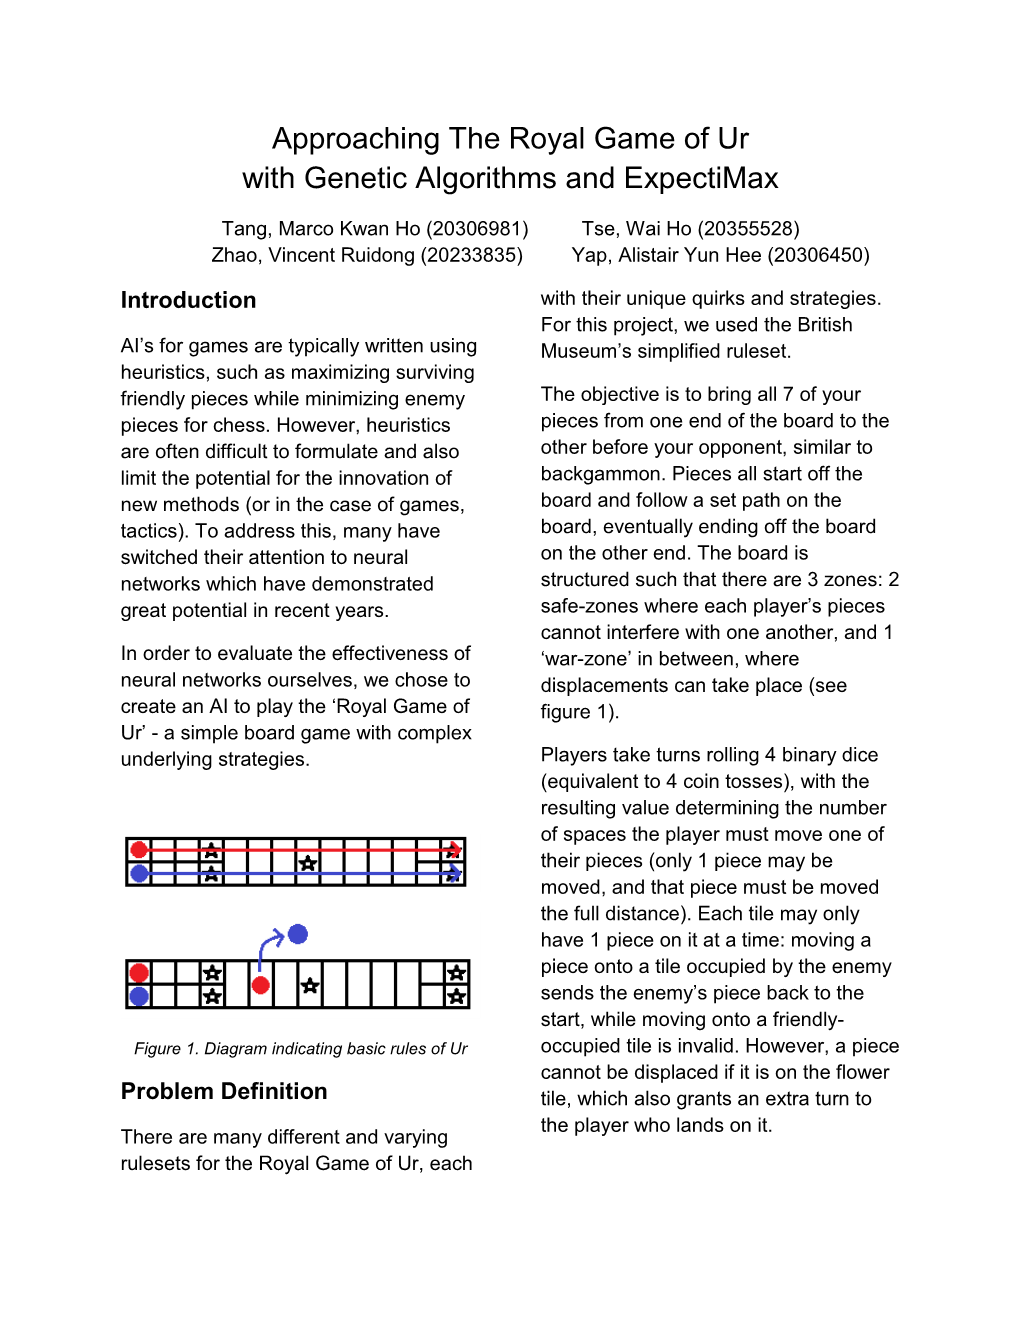 Approaching the Royal Game of Ur with Genetic Algorithms and Expectimax